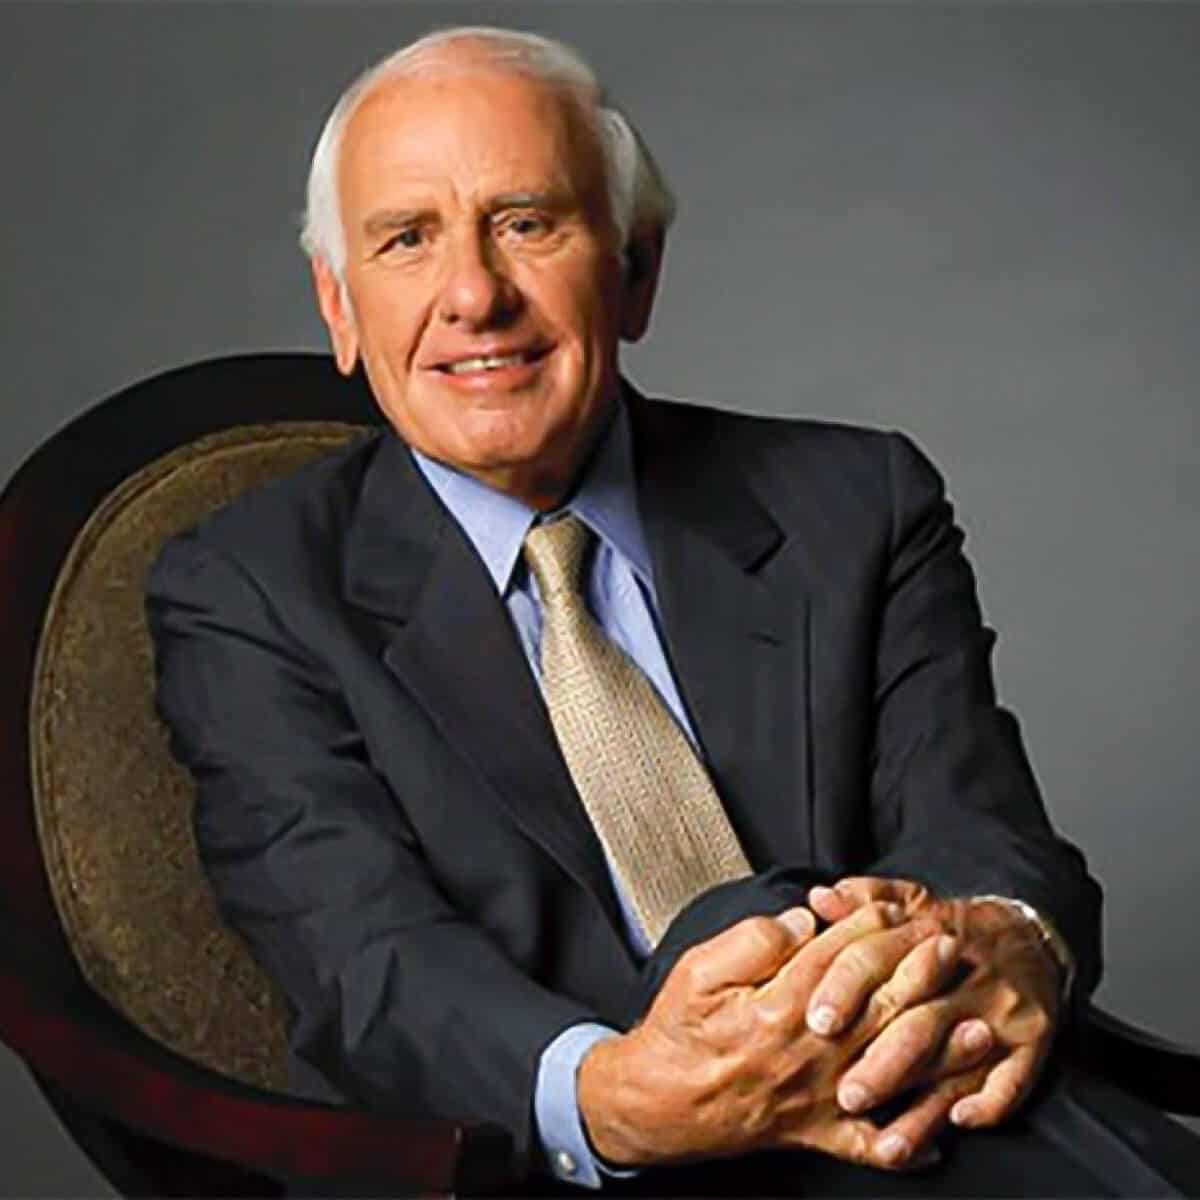 Jim Rohn sitting down with his hands together.